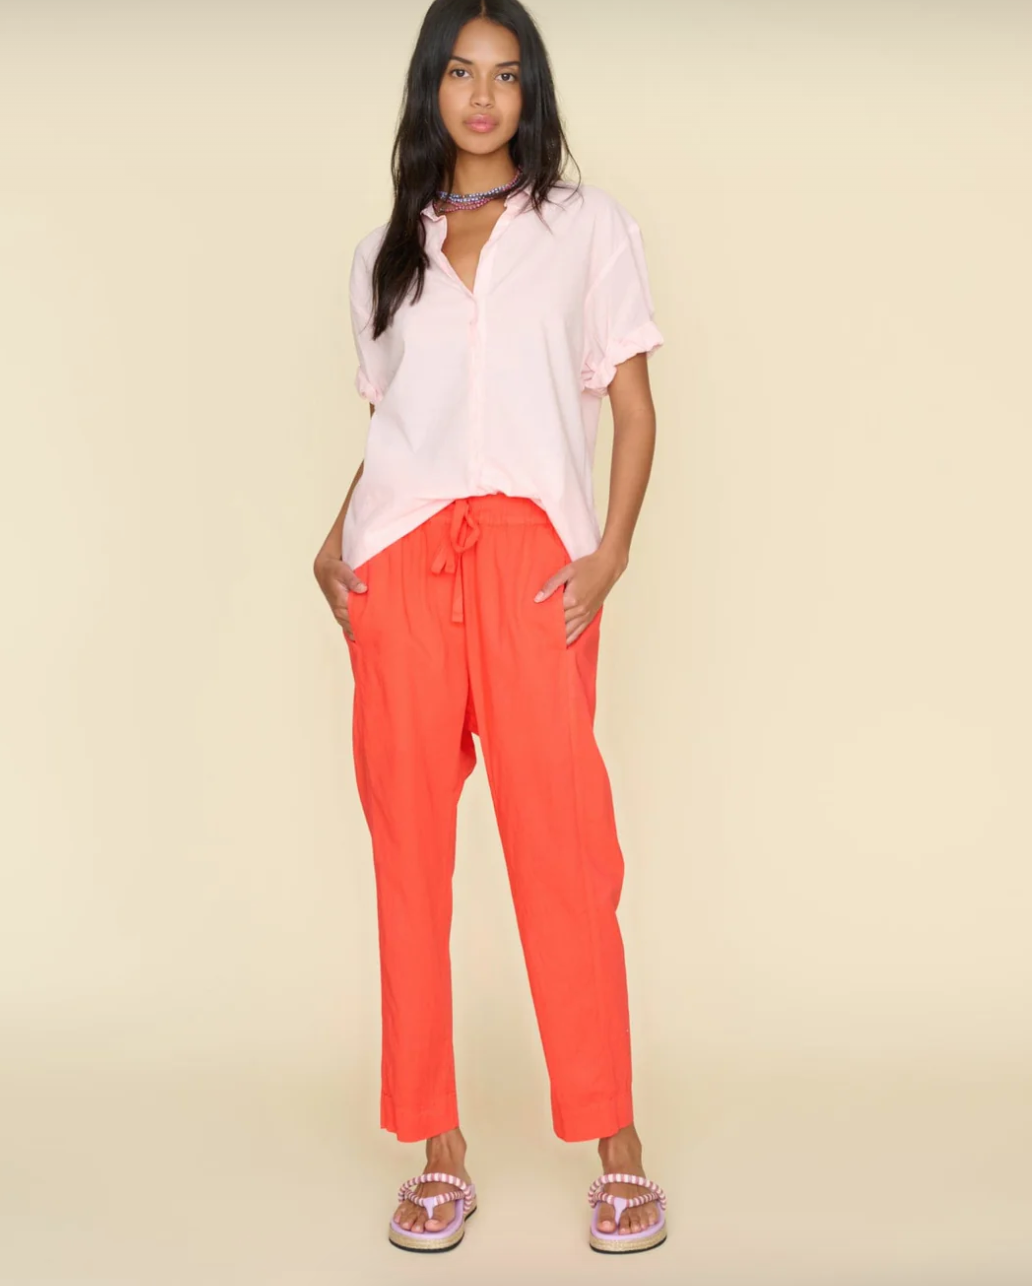 A woman with long dark hair stands against a plain beige background, reminiscent of a cozy Scottsdale bungalow. She wears a light pink shirt with rolled-up sleeves, Xirena's bright orange Punch Draper Pant, and pink sandals with decorative beading. She has her hands in her pockets and gazes at the camera.